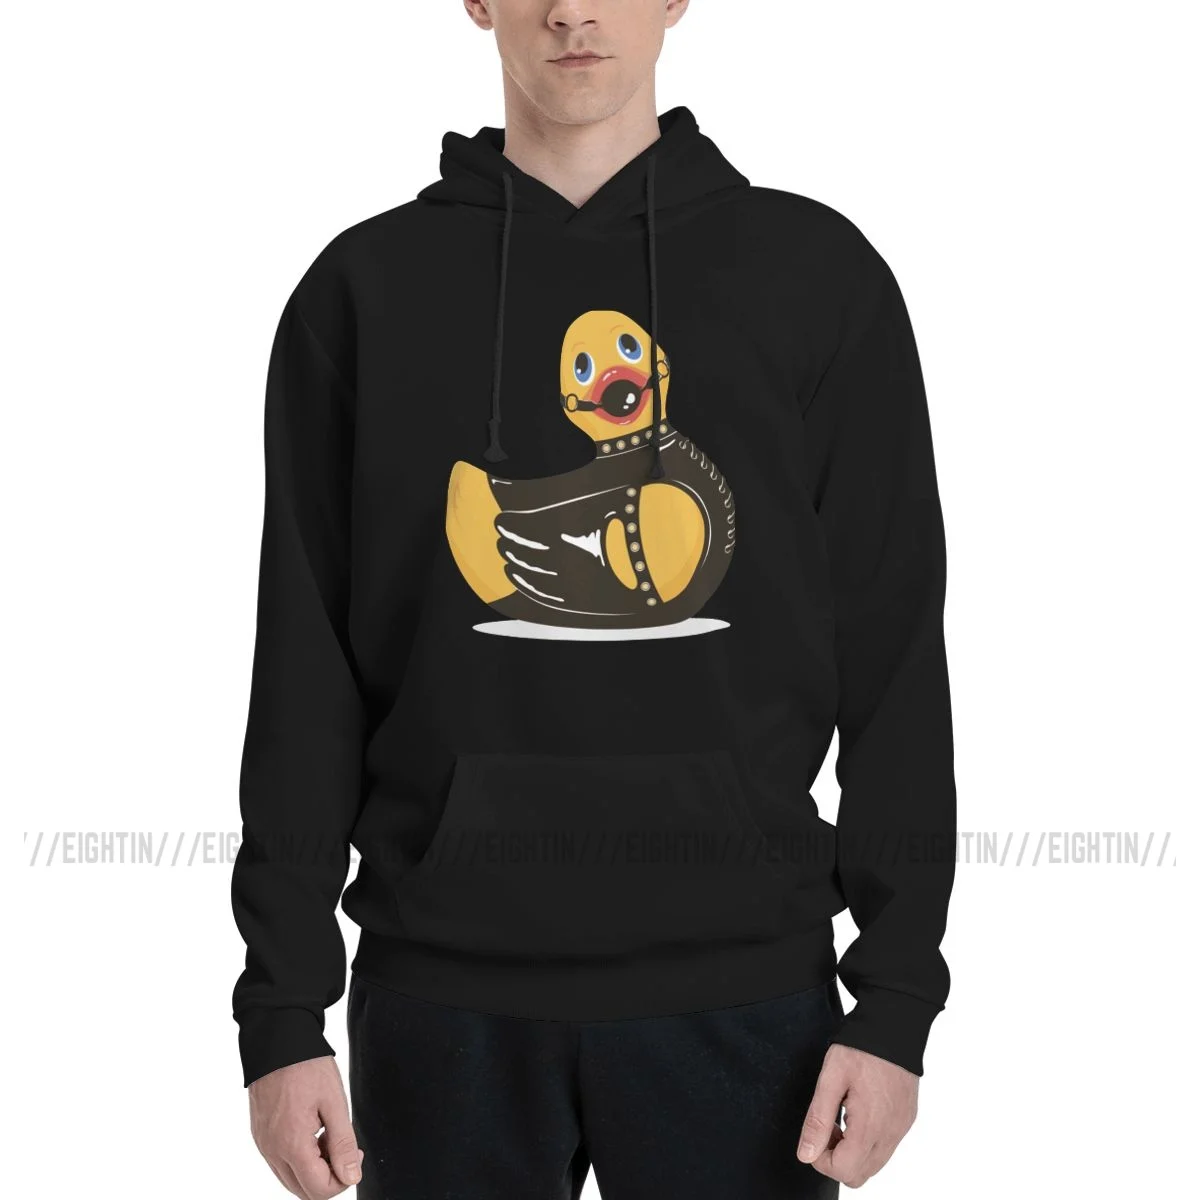 

BDSM Duck Fashion Sweatshirts Men's Dominant Submissive Slave Play Submission Master Sexy Sub Long Sleeve Hoodie Autumn Pullover